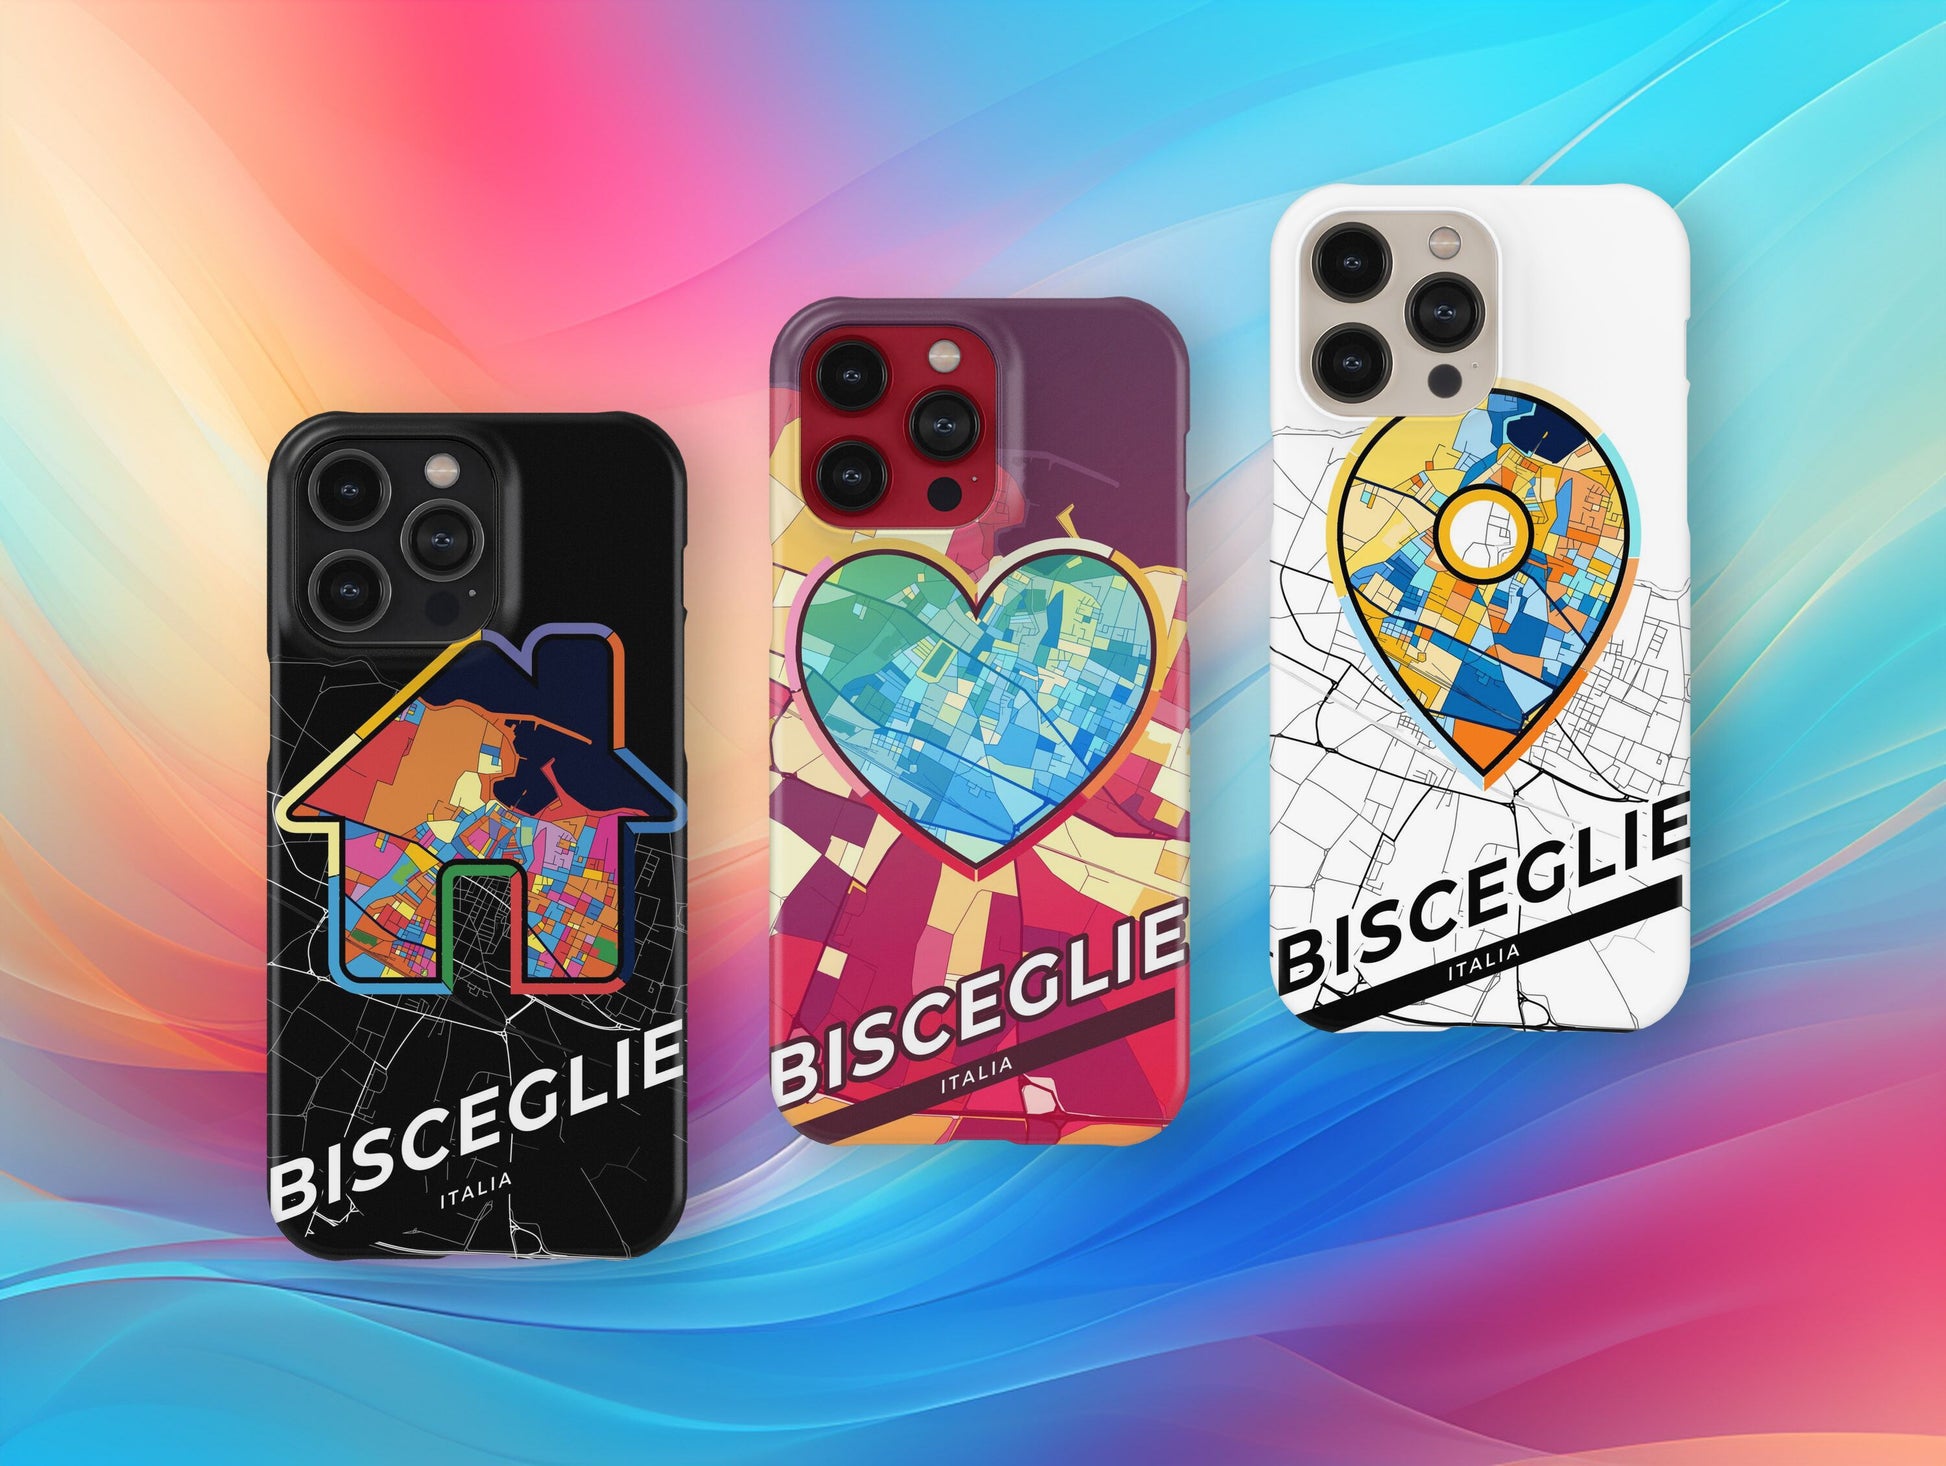 Bisceglie Italy slim phone case with colorful icon. Birthday, wedding or housewarming gift. Couple match cases.